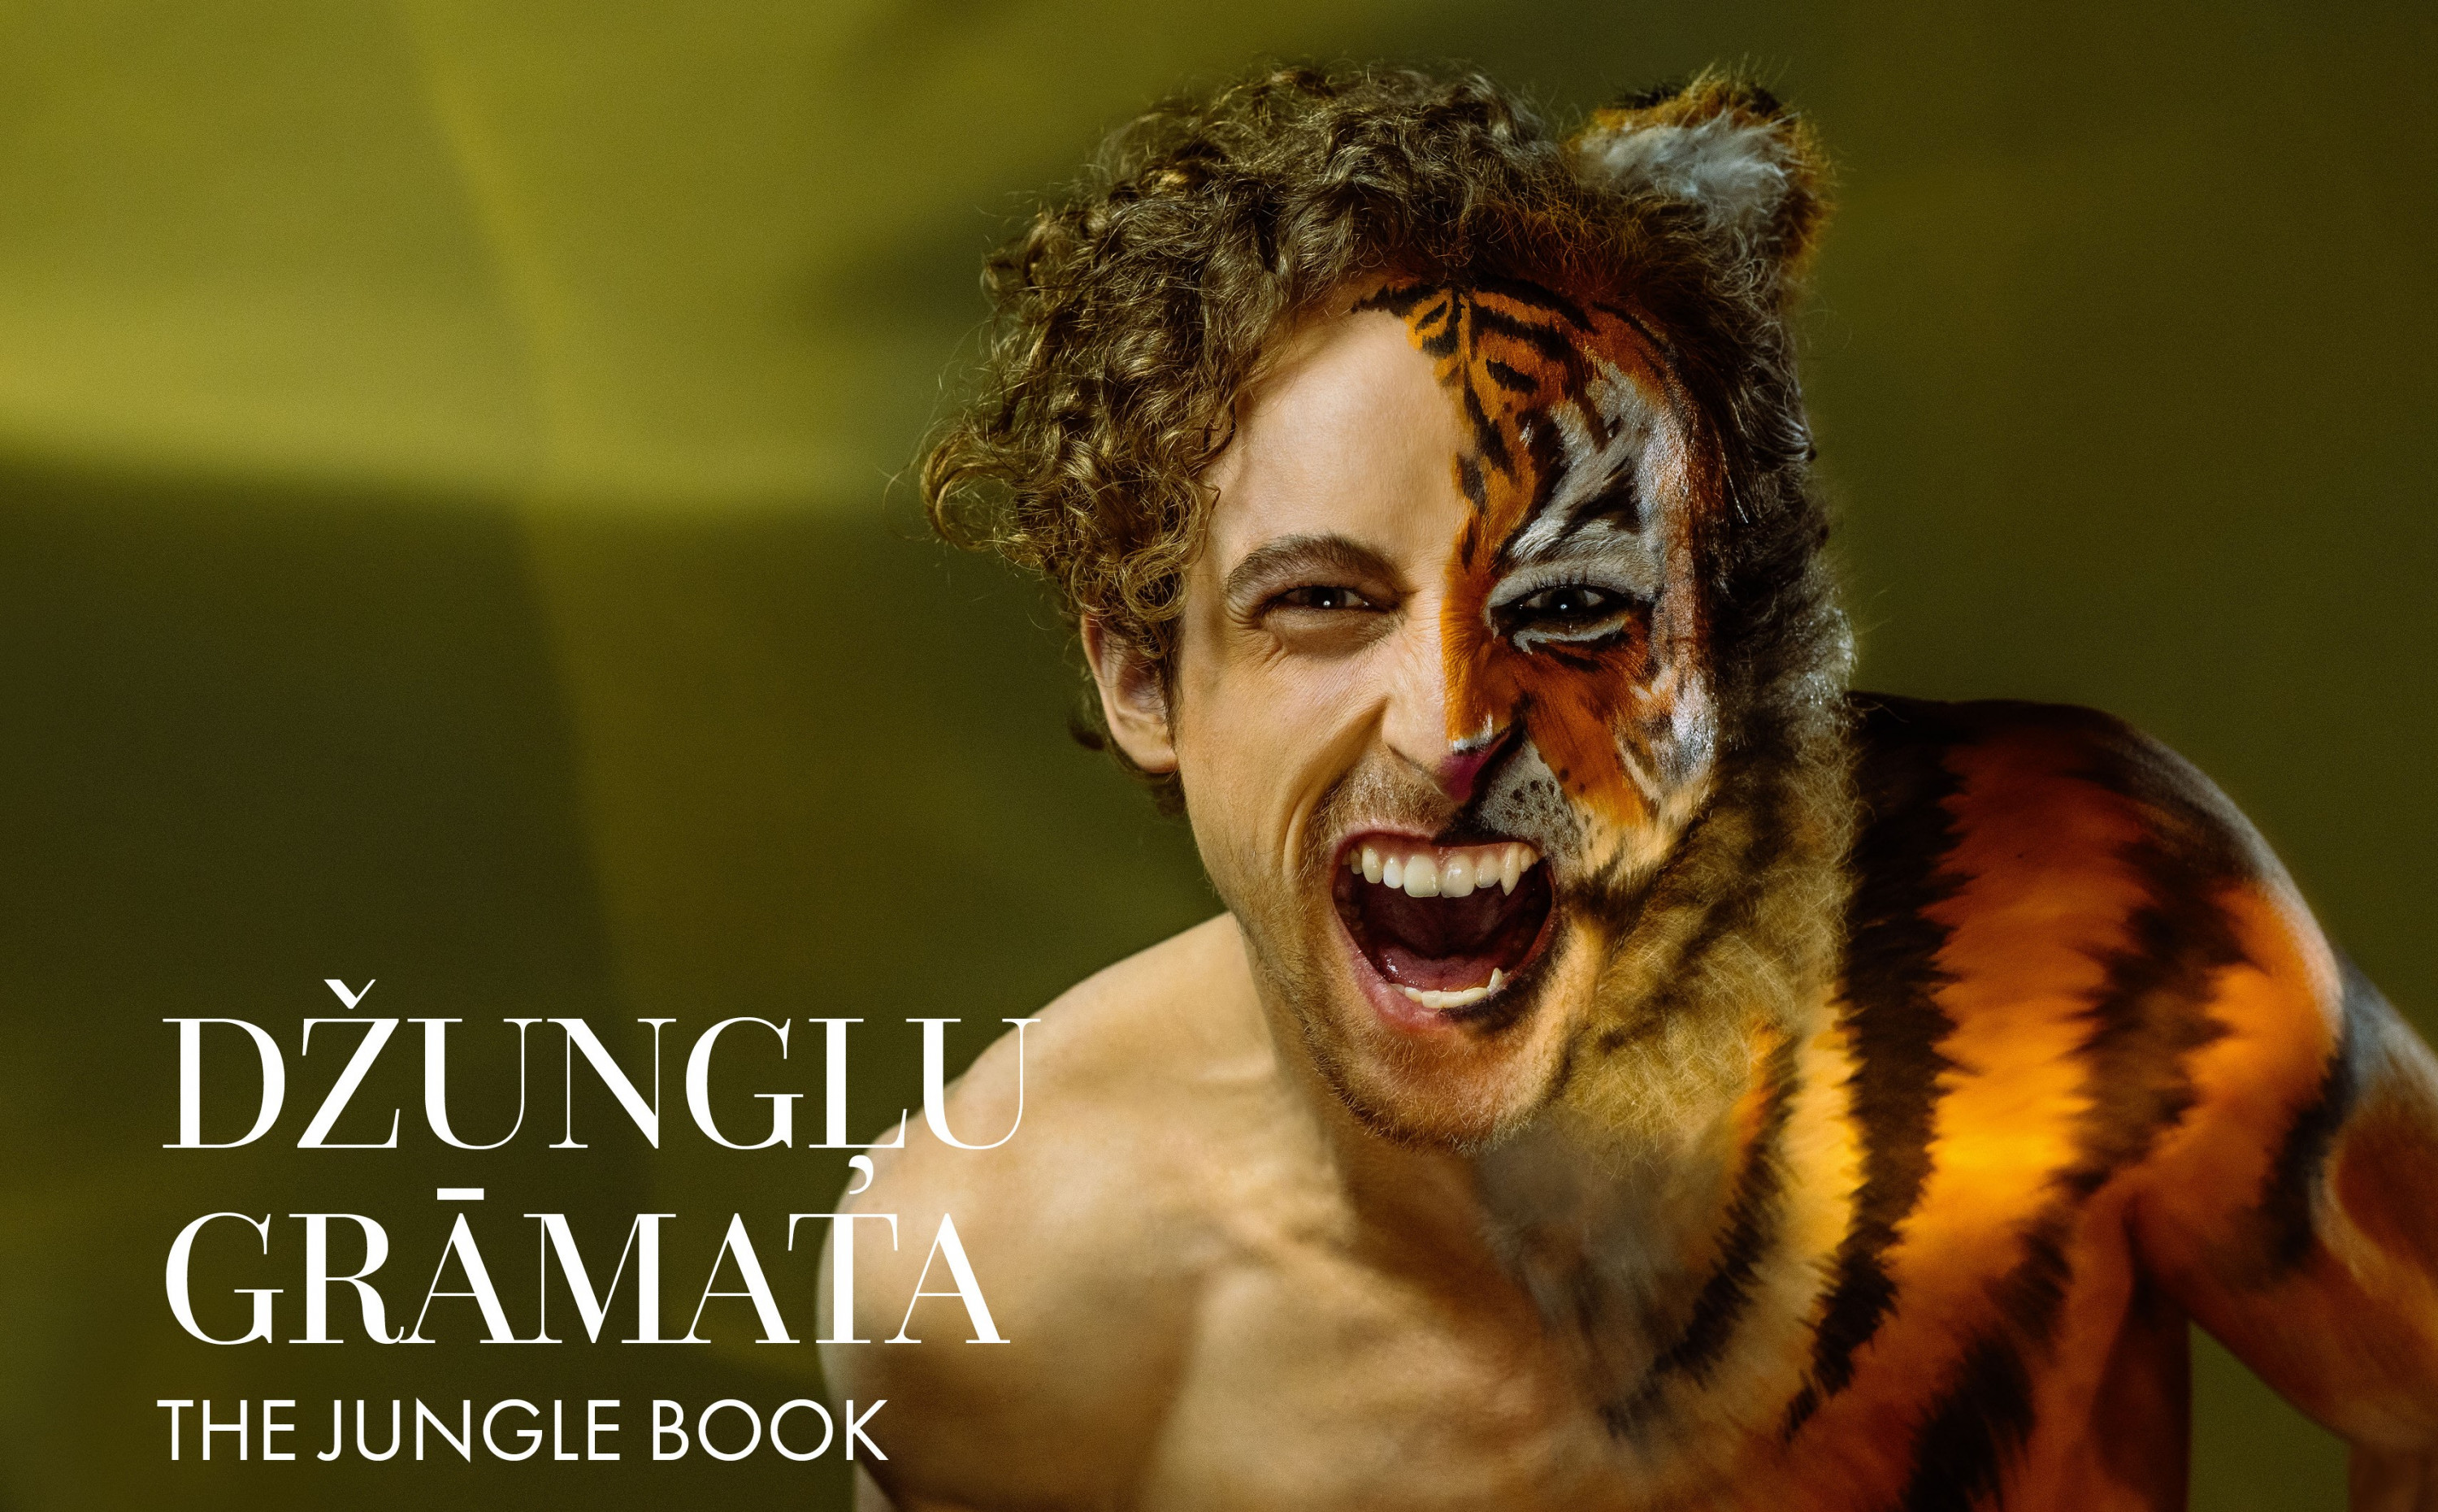 World premiere of the ballet “The Jungle Book” on April 12